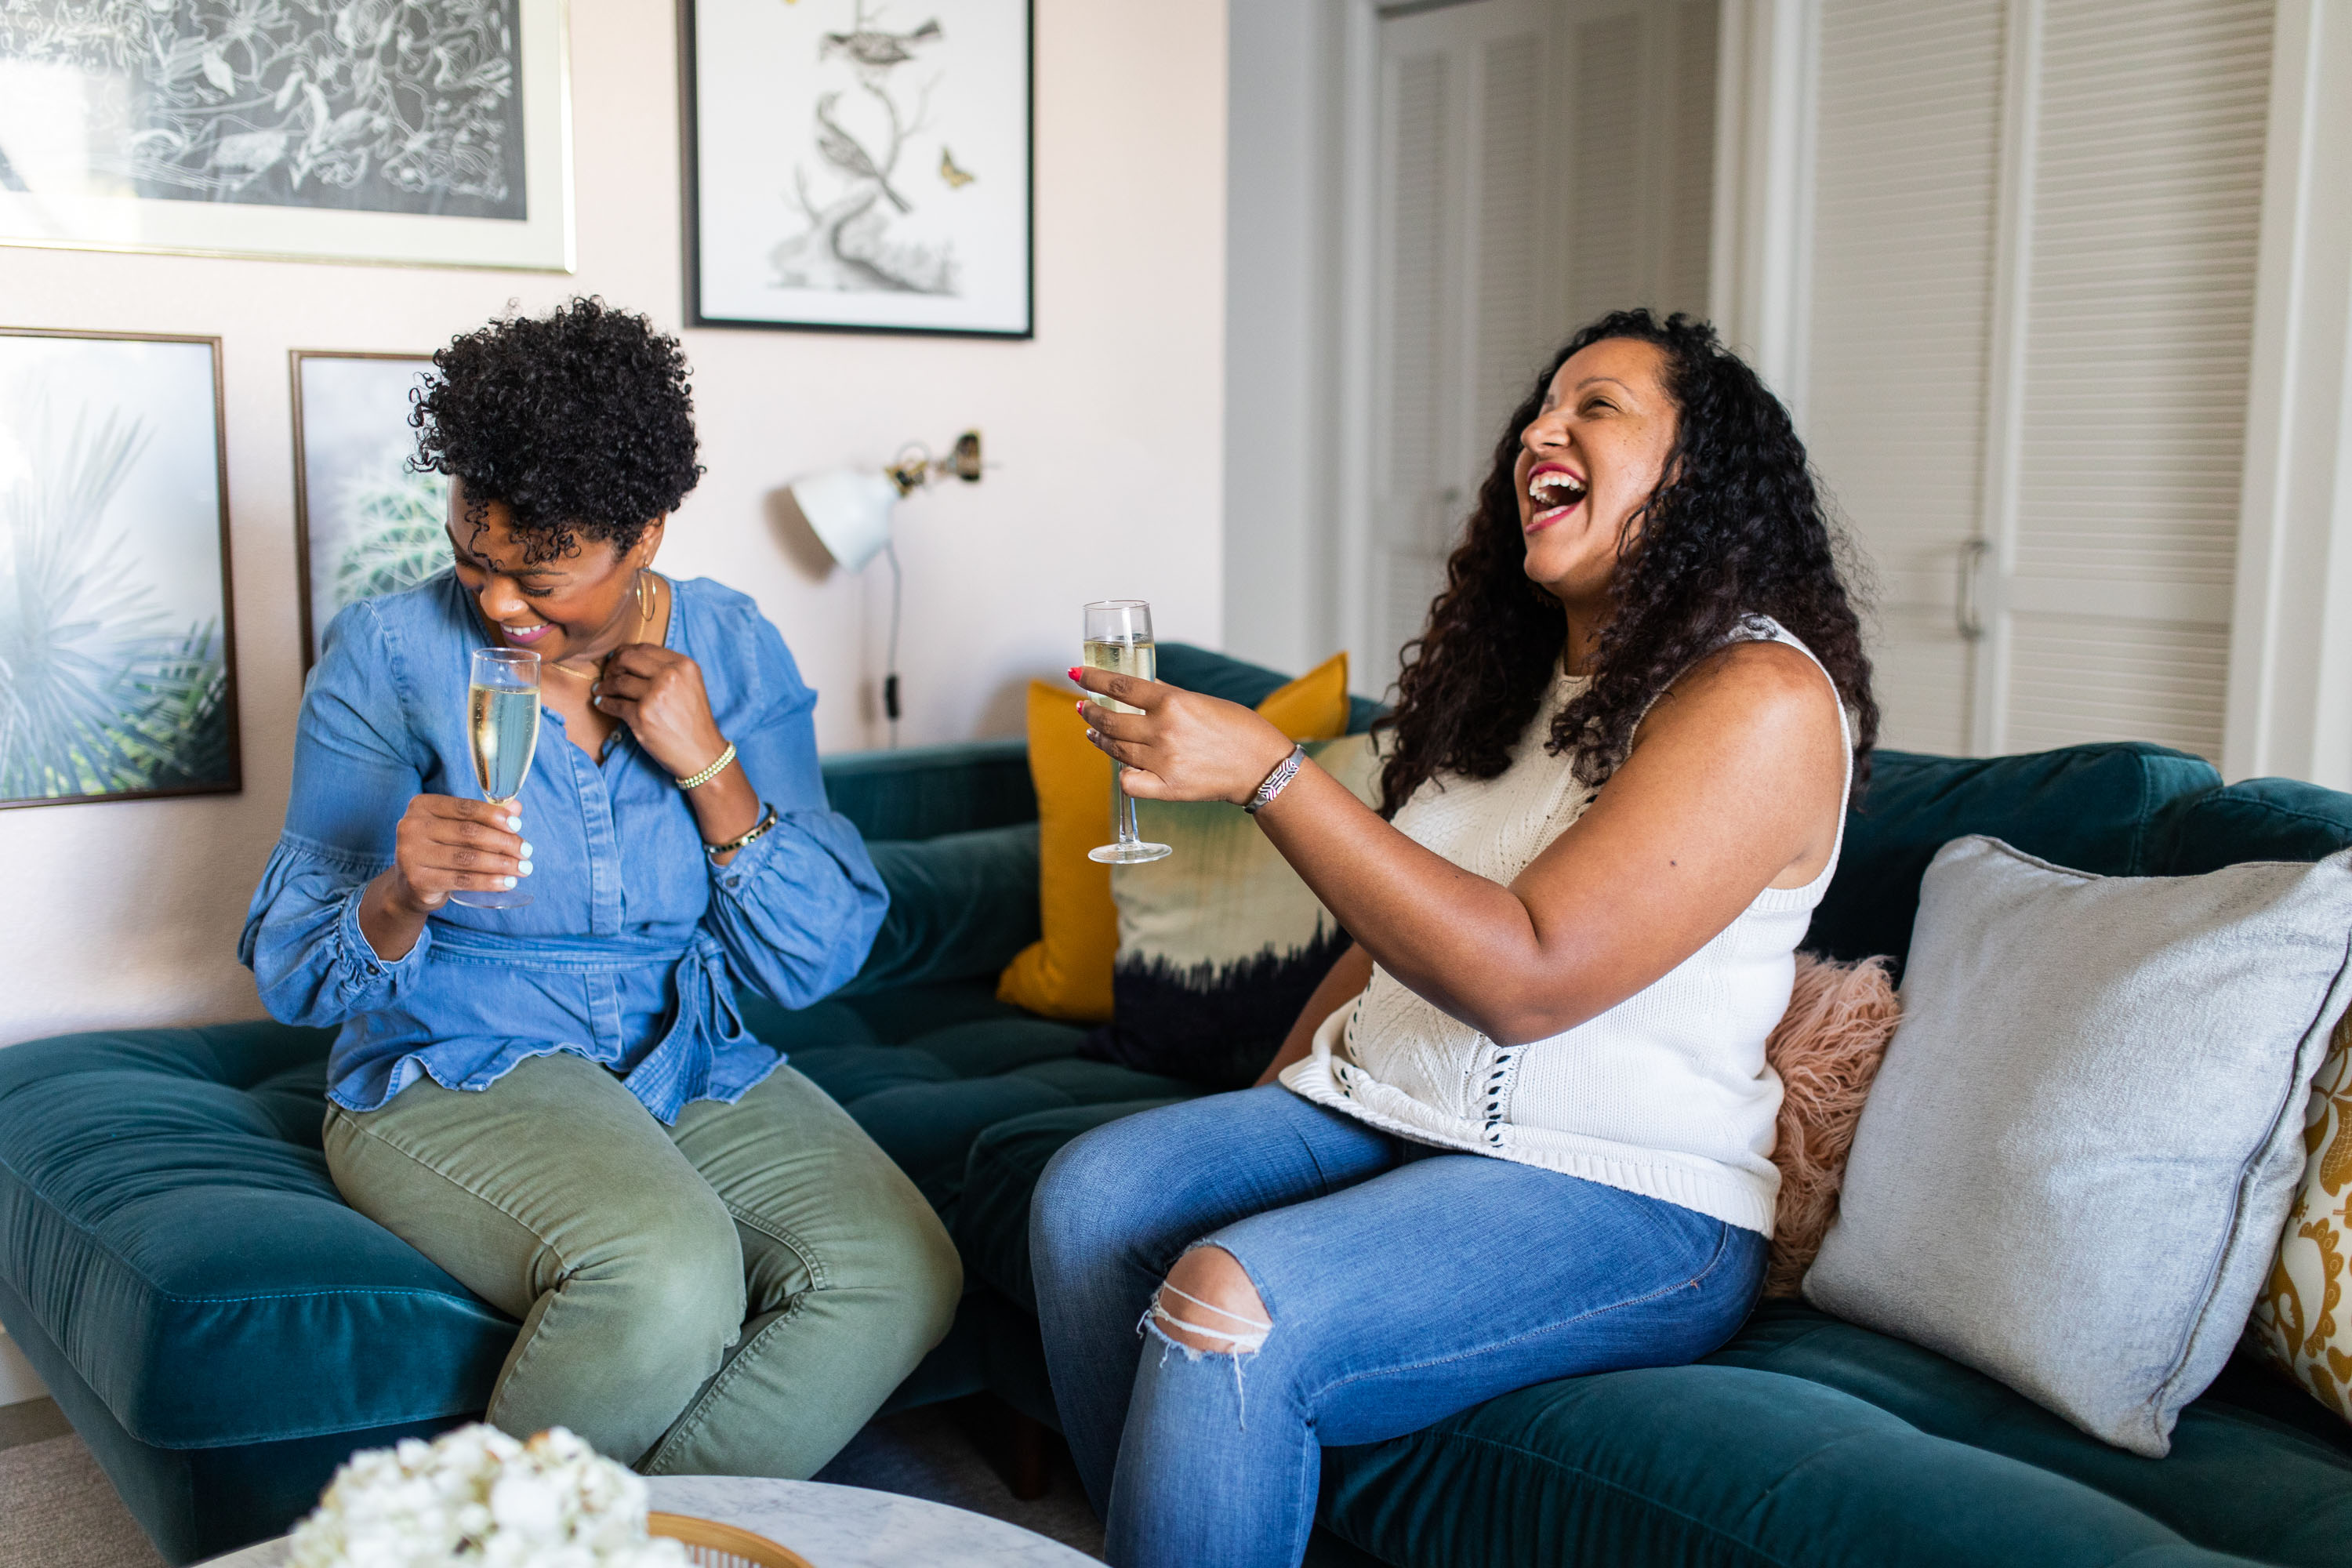 2019 Goals-Happy Hour at Home